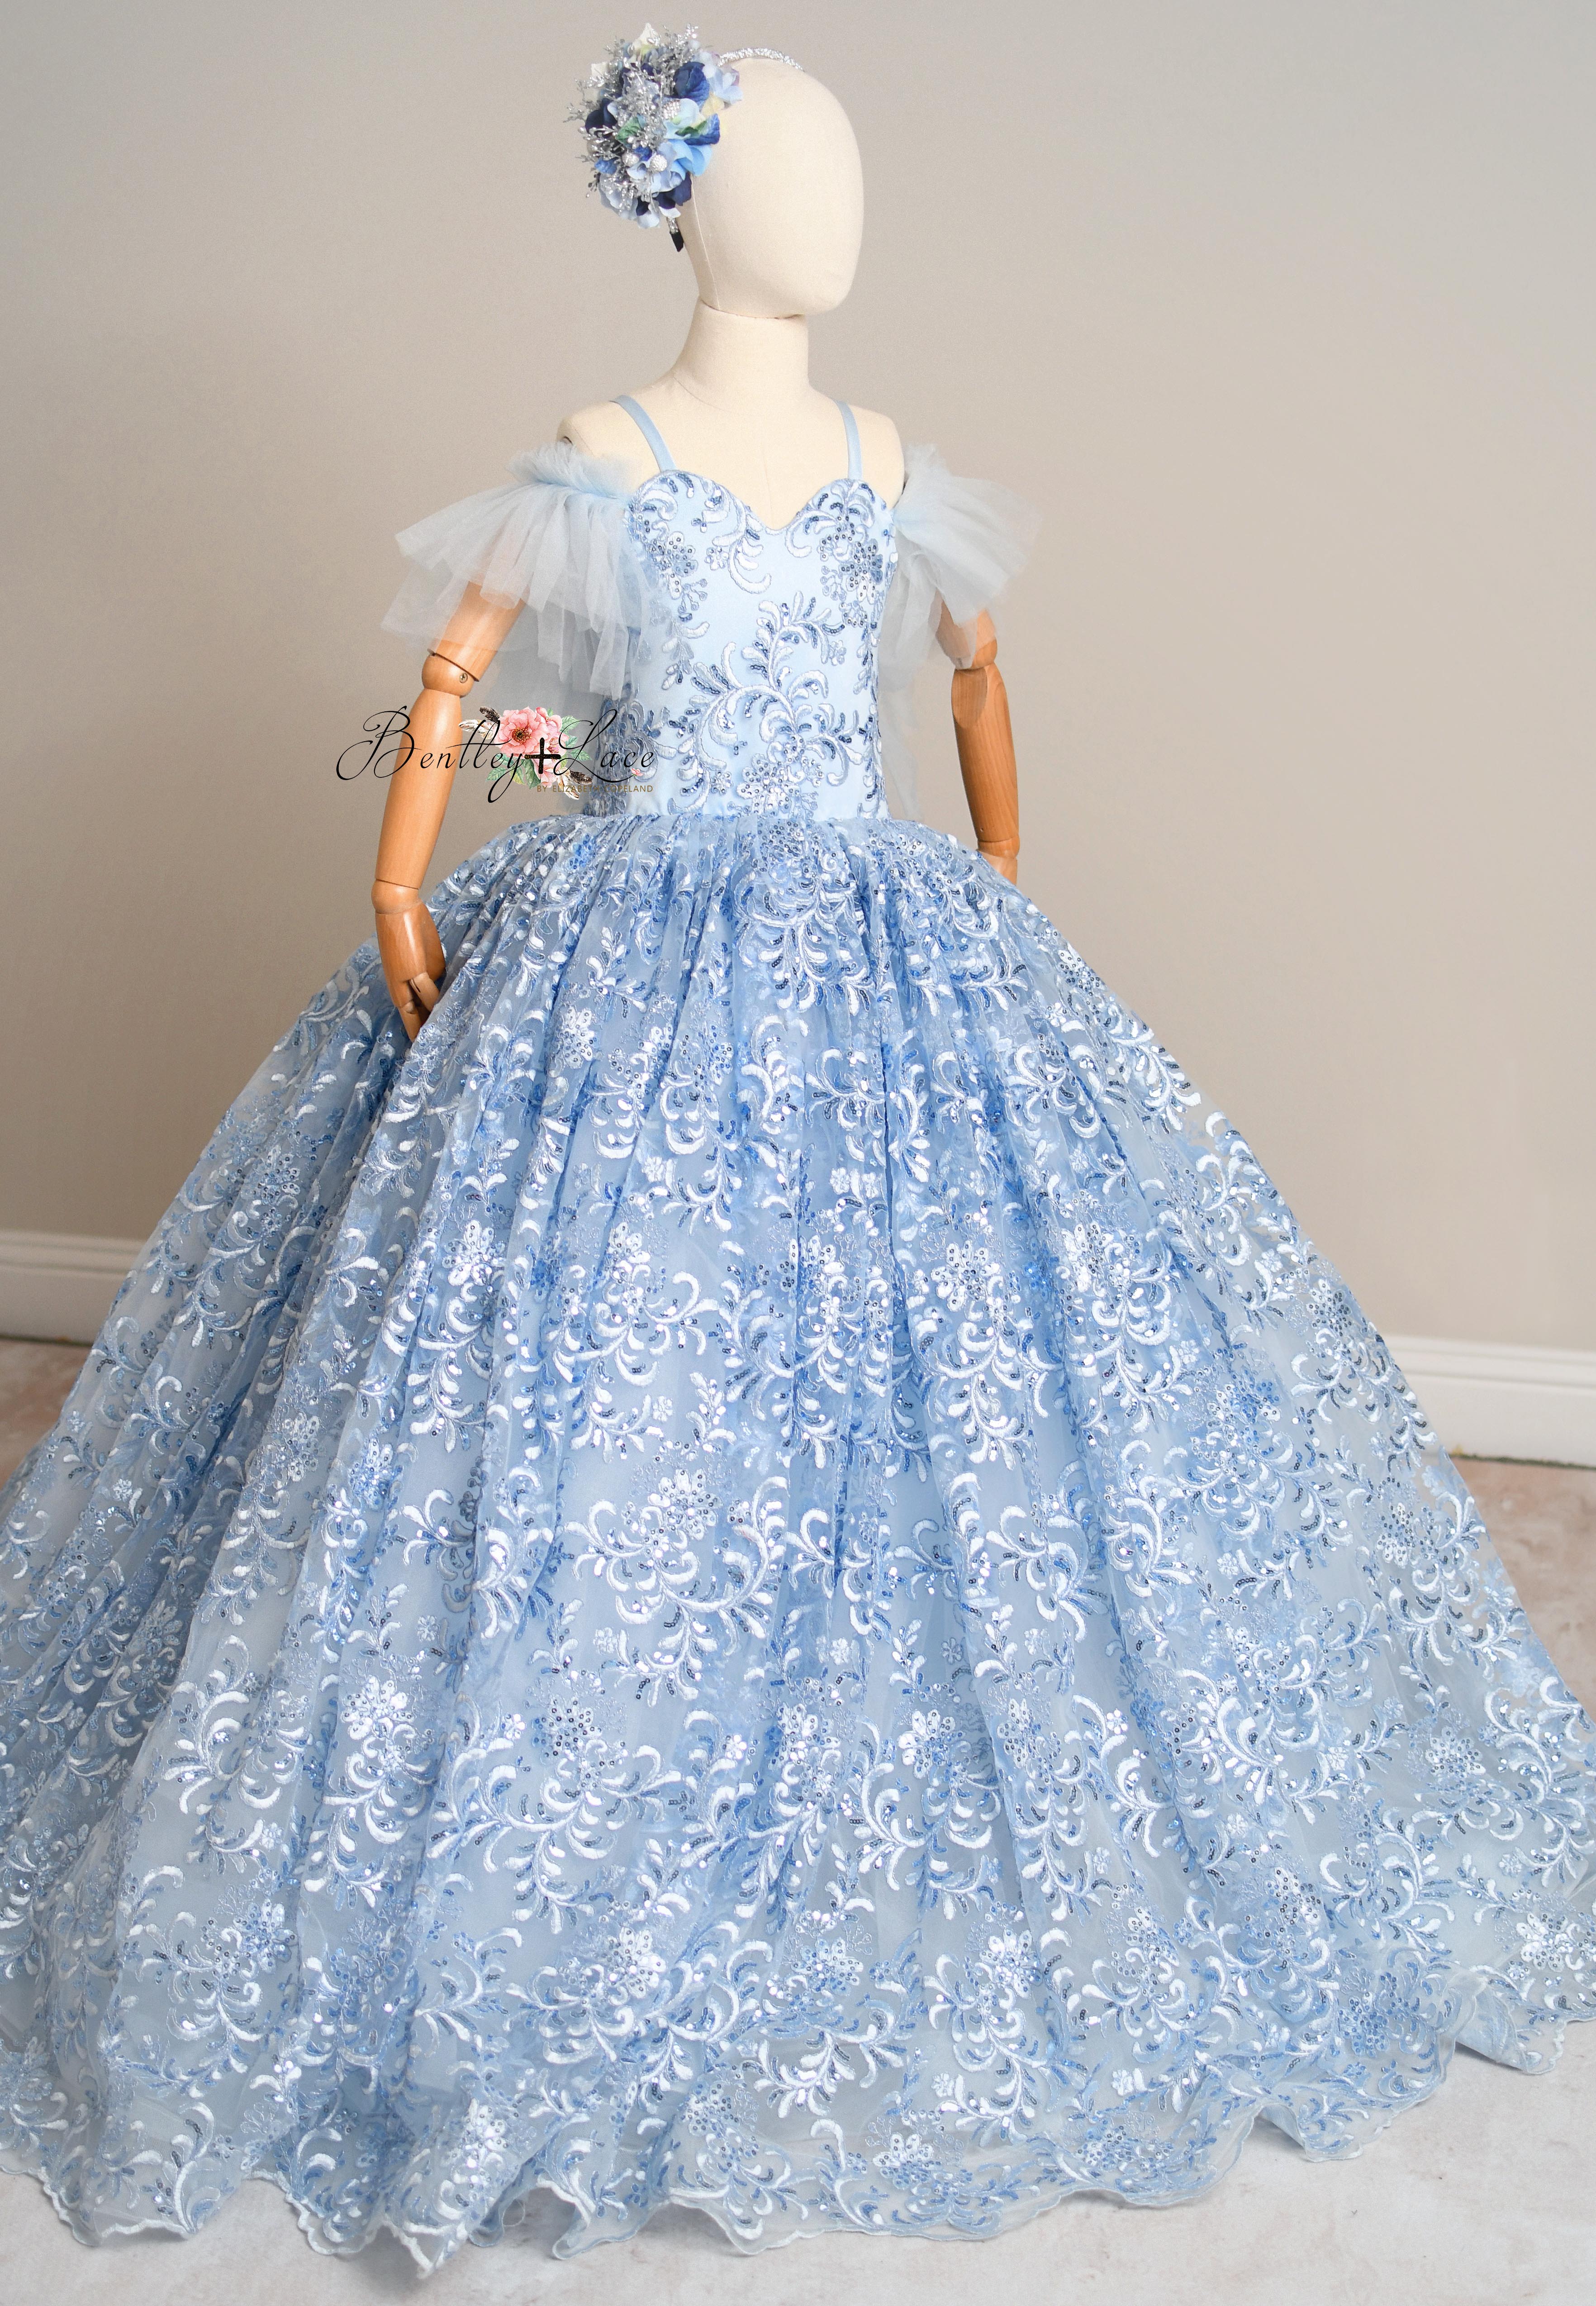 Cinderella inspired gowns for photography sessions